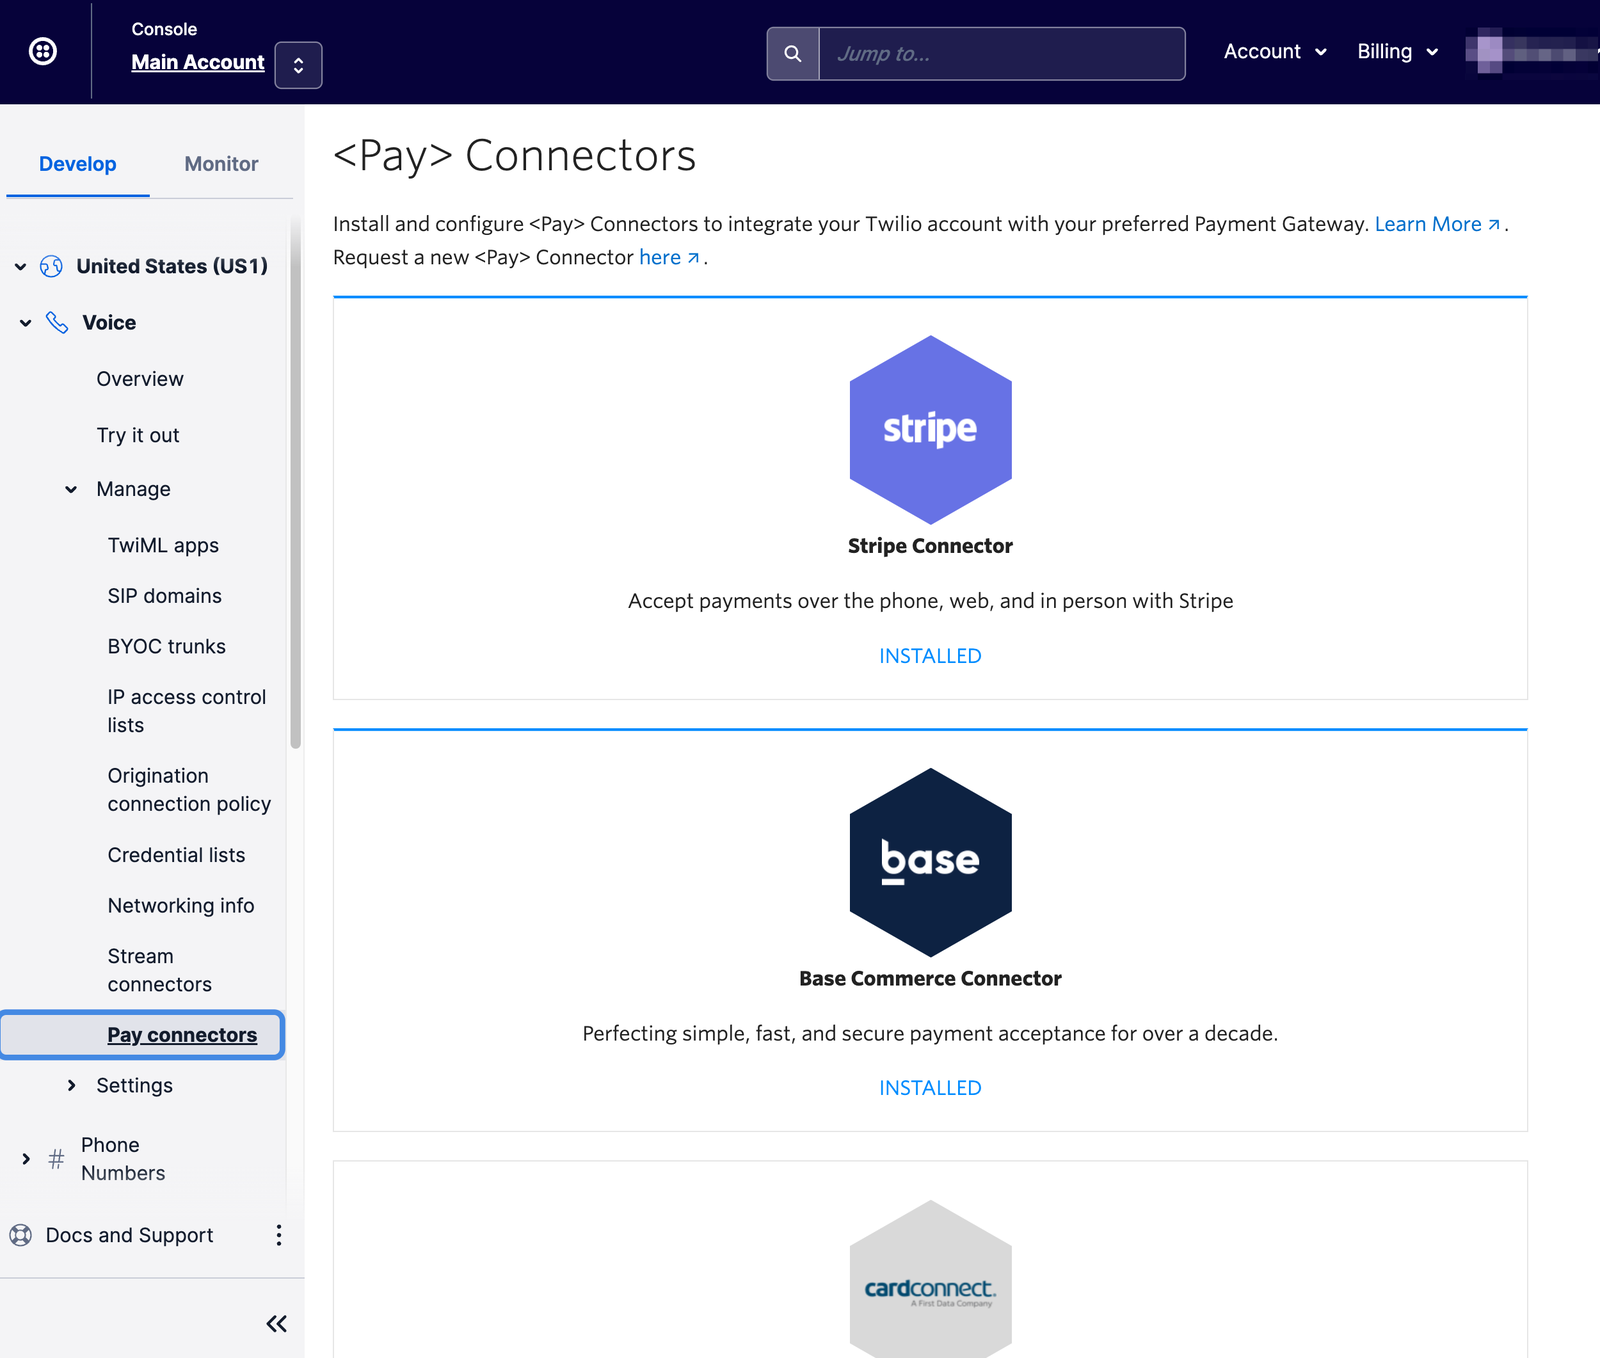 Pay Connectors Console page listing available Pay Connectors.